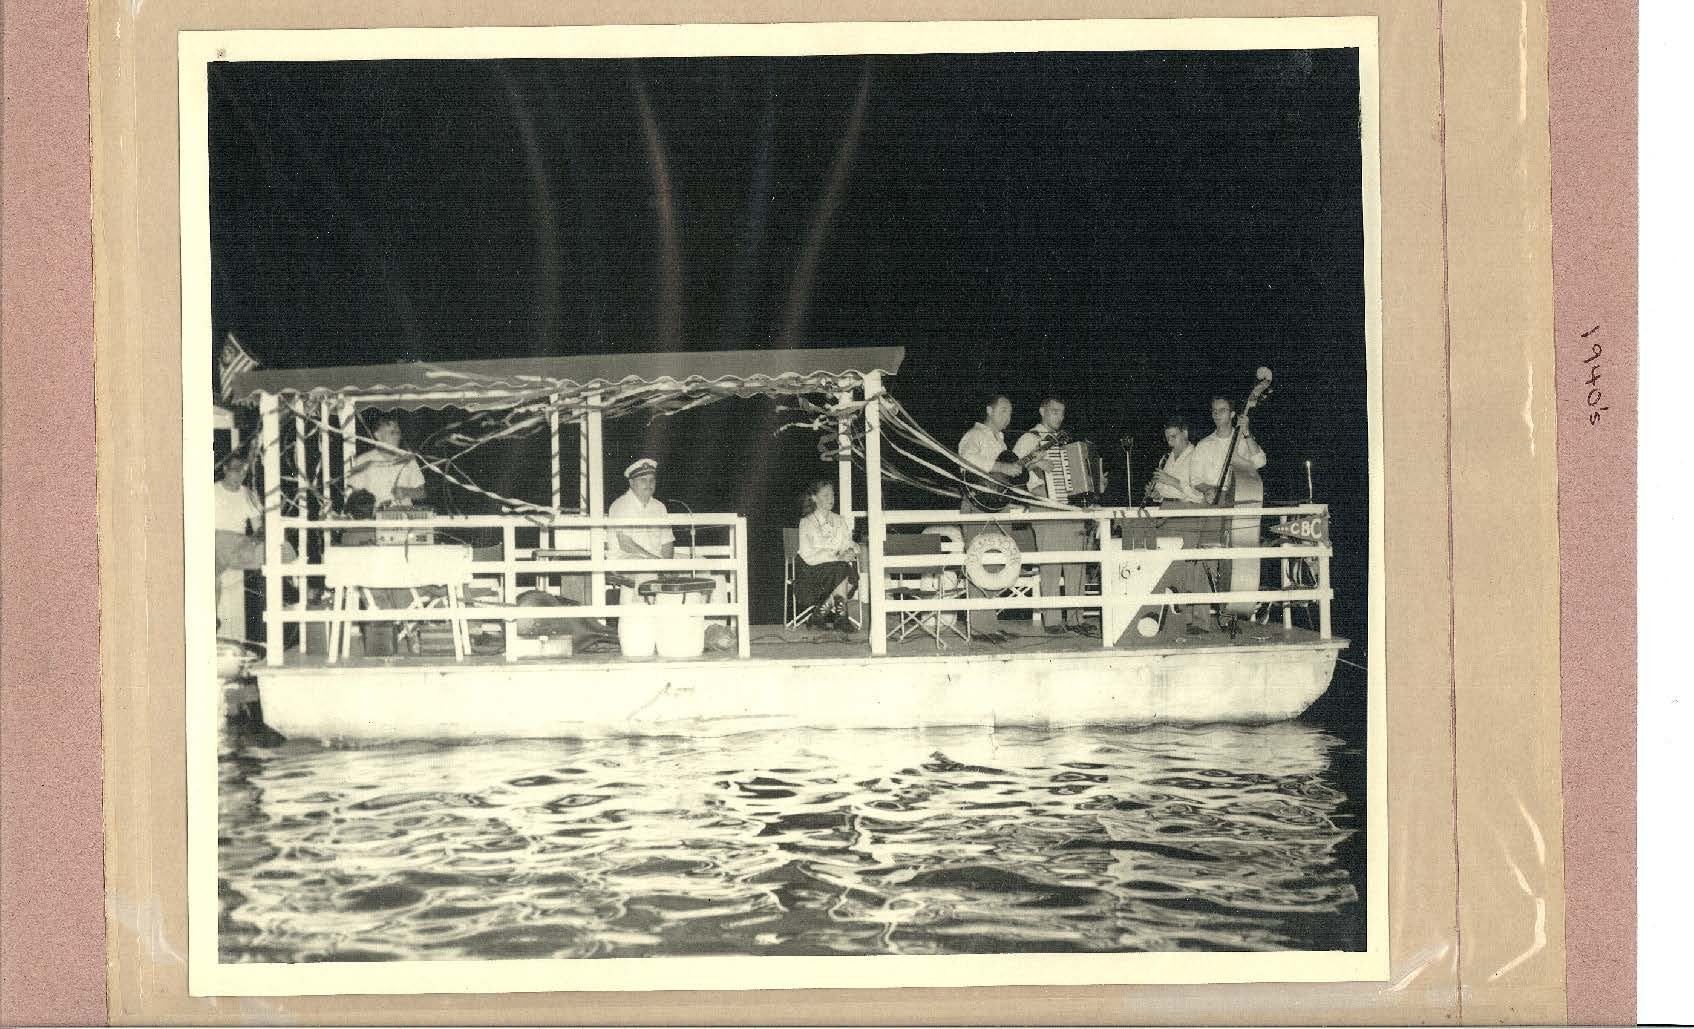 Photo "1940's" shows band on barge